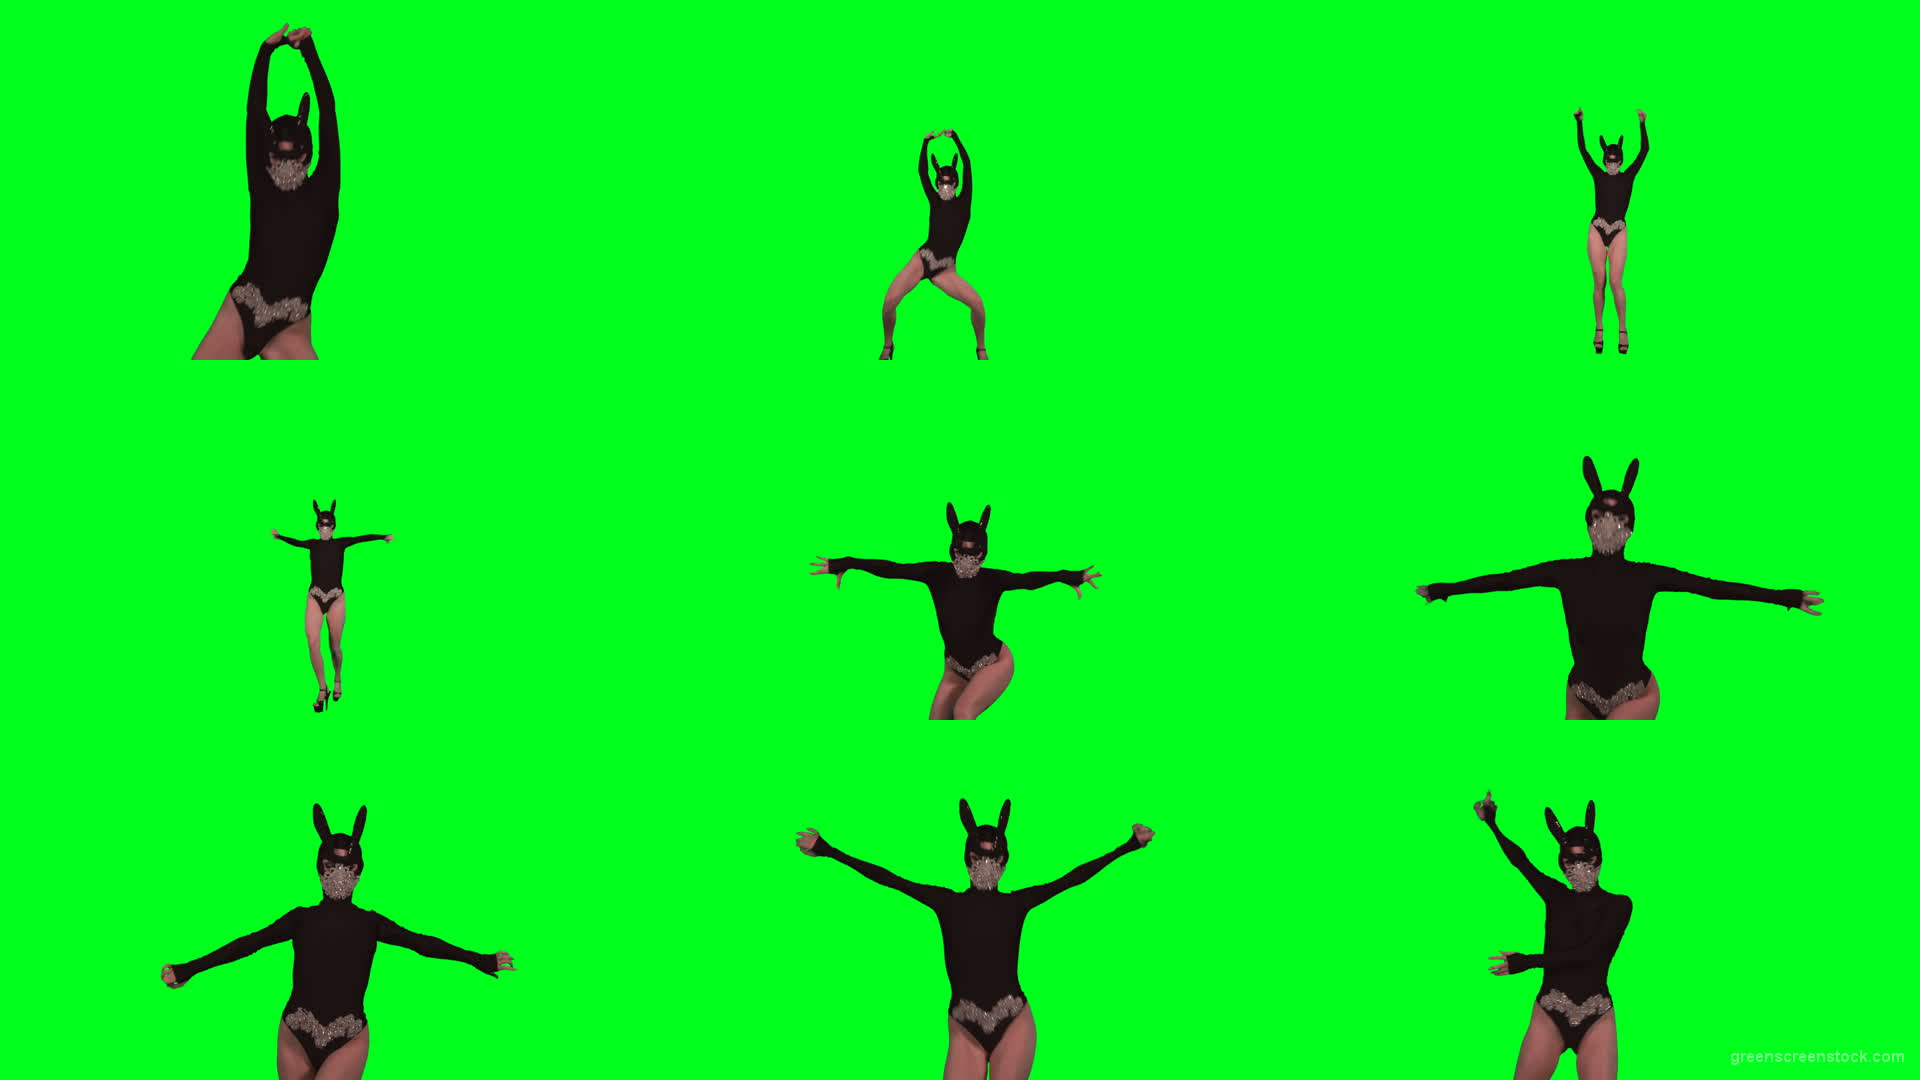 Rave-Calling-EDM-Go-Go-Dancing-Girl-performs-on-green-screen-4K-Video-Footage-1920 Green Screen Stock